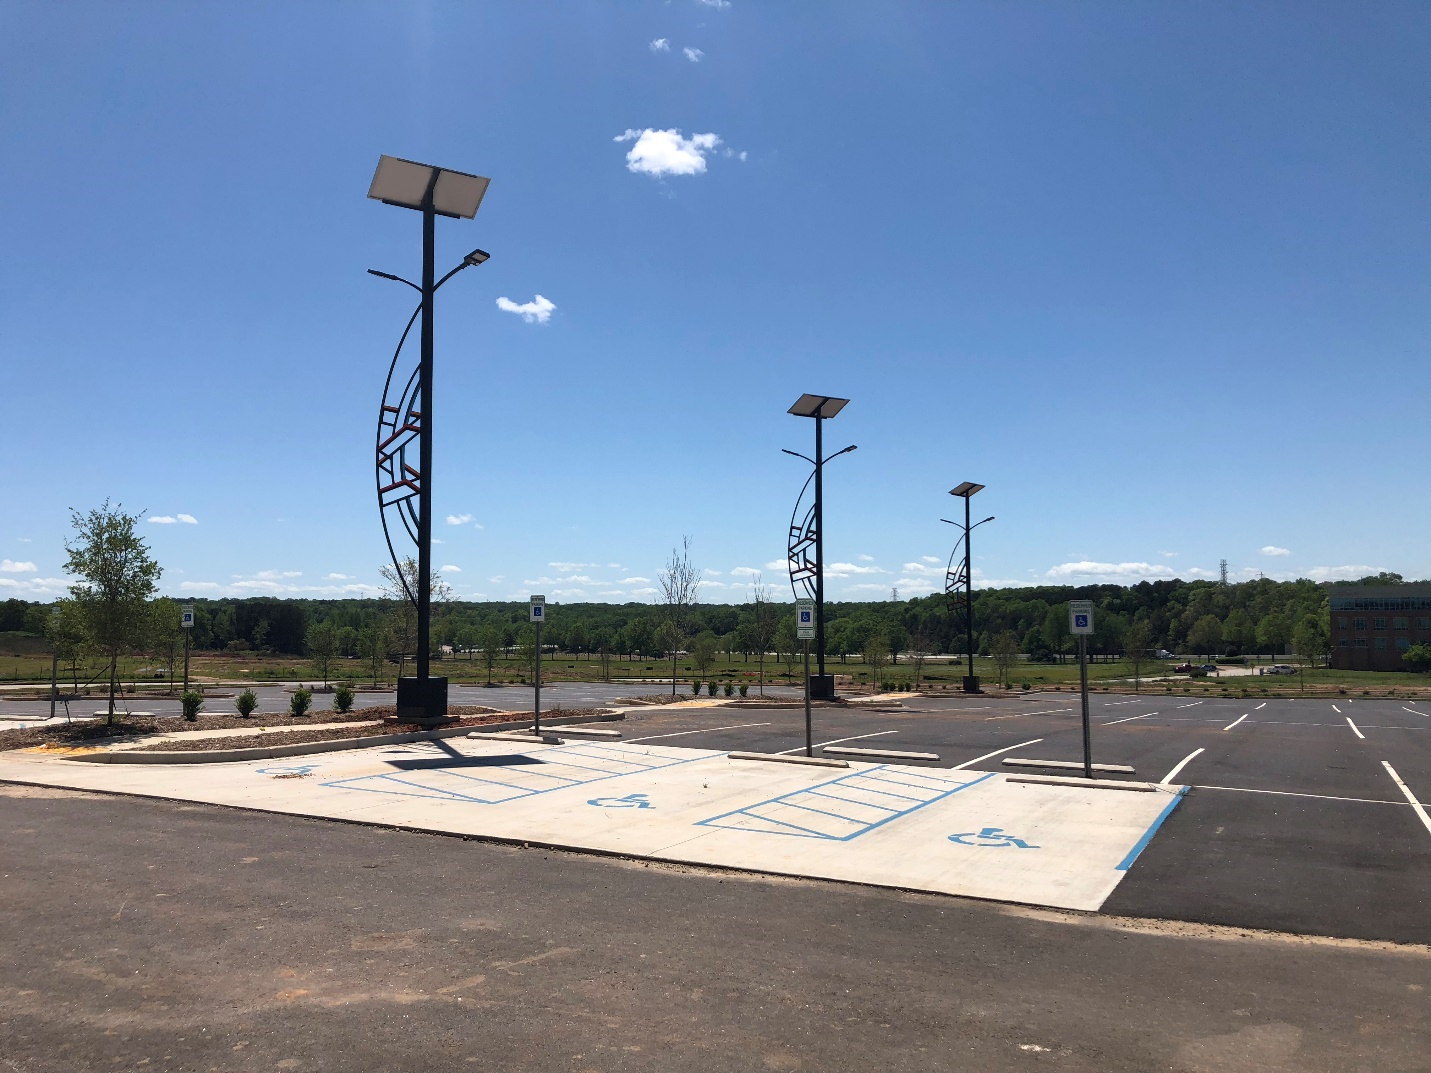 three solar powered parking lot lights in a row during the day